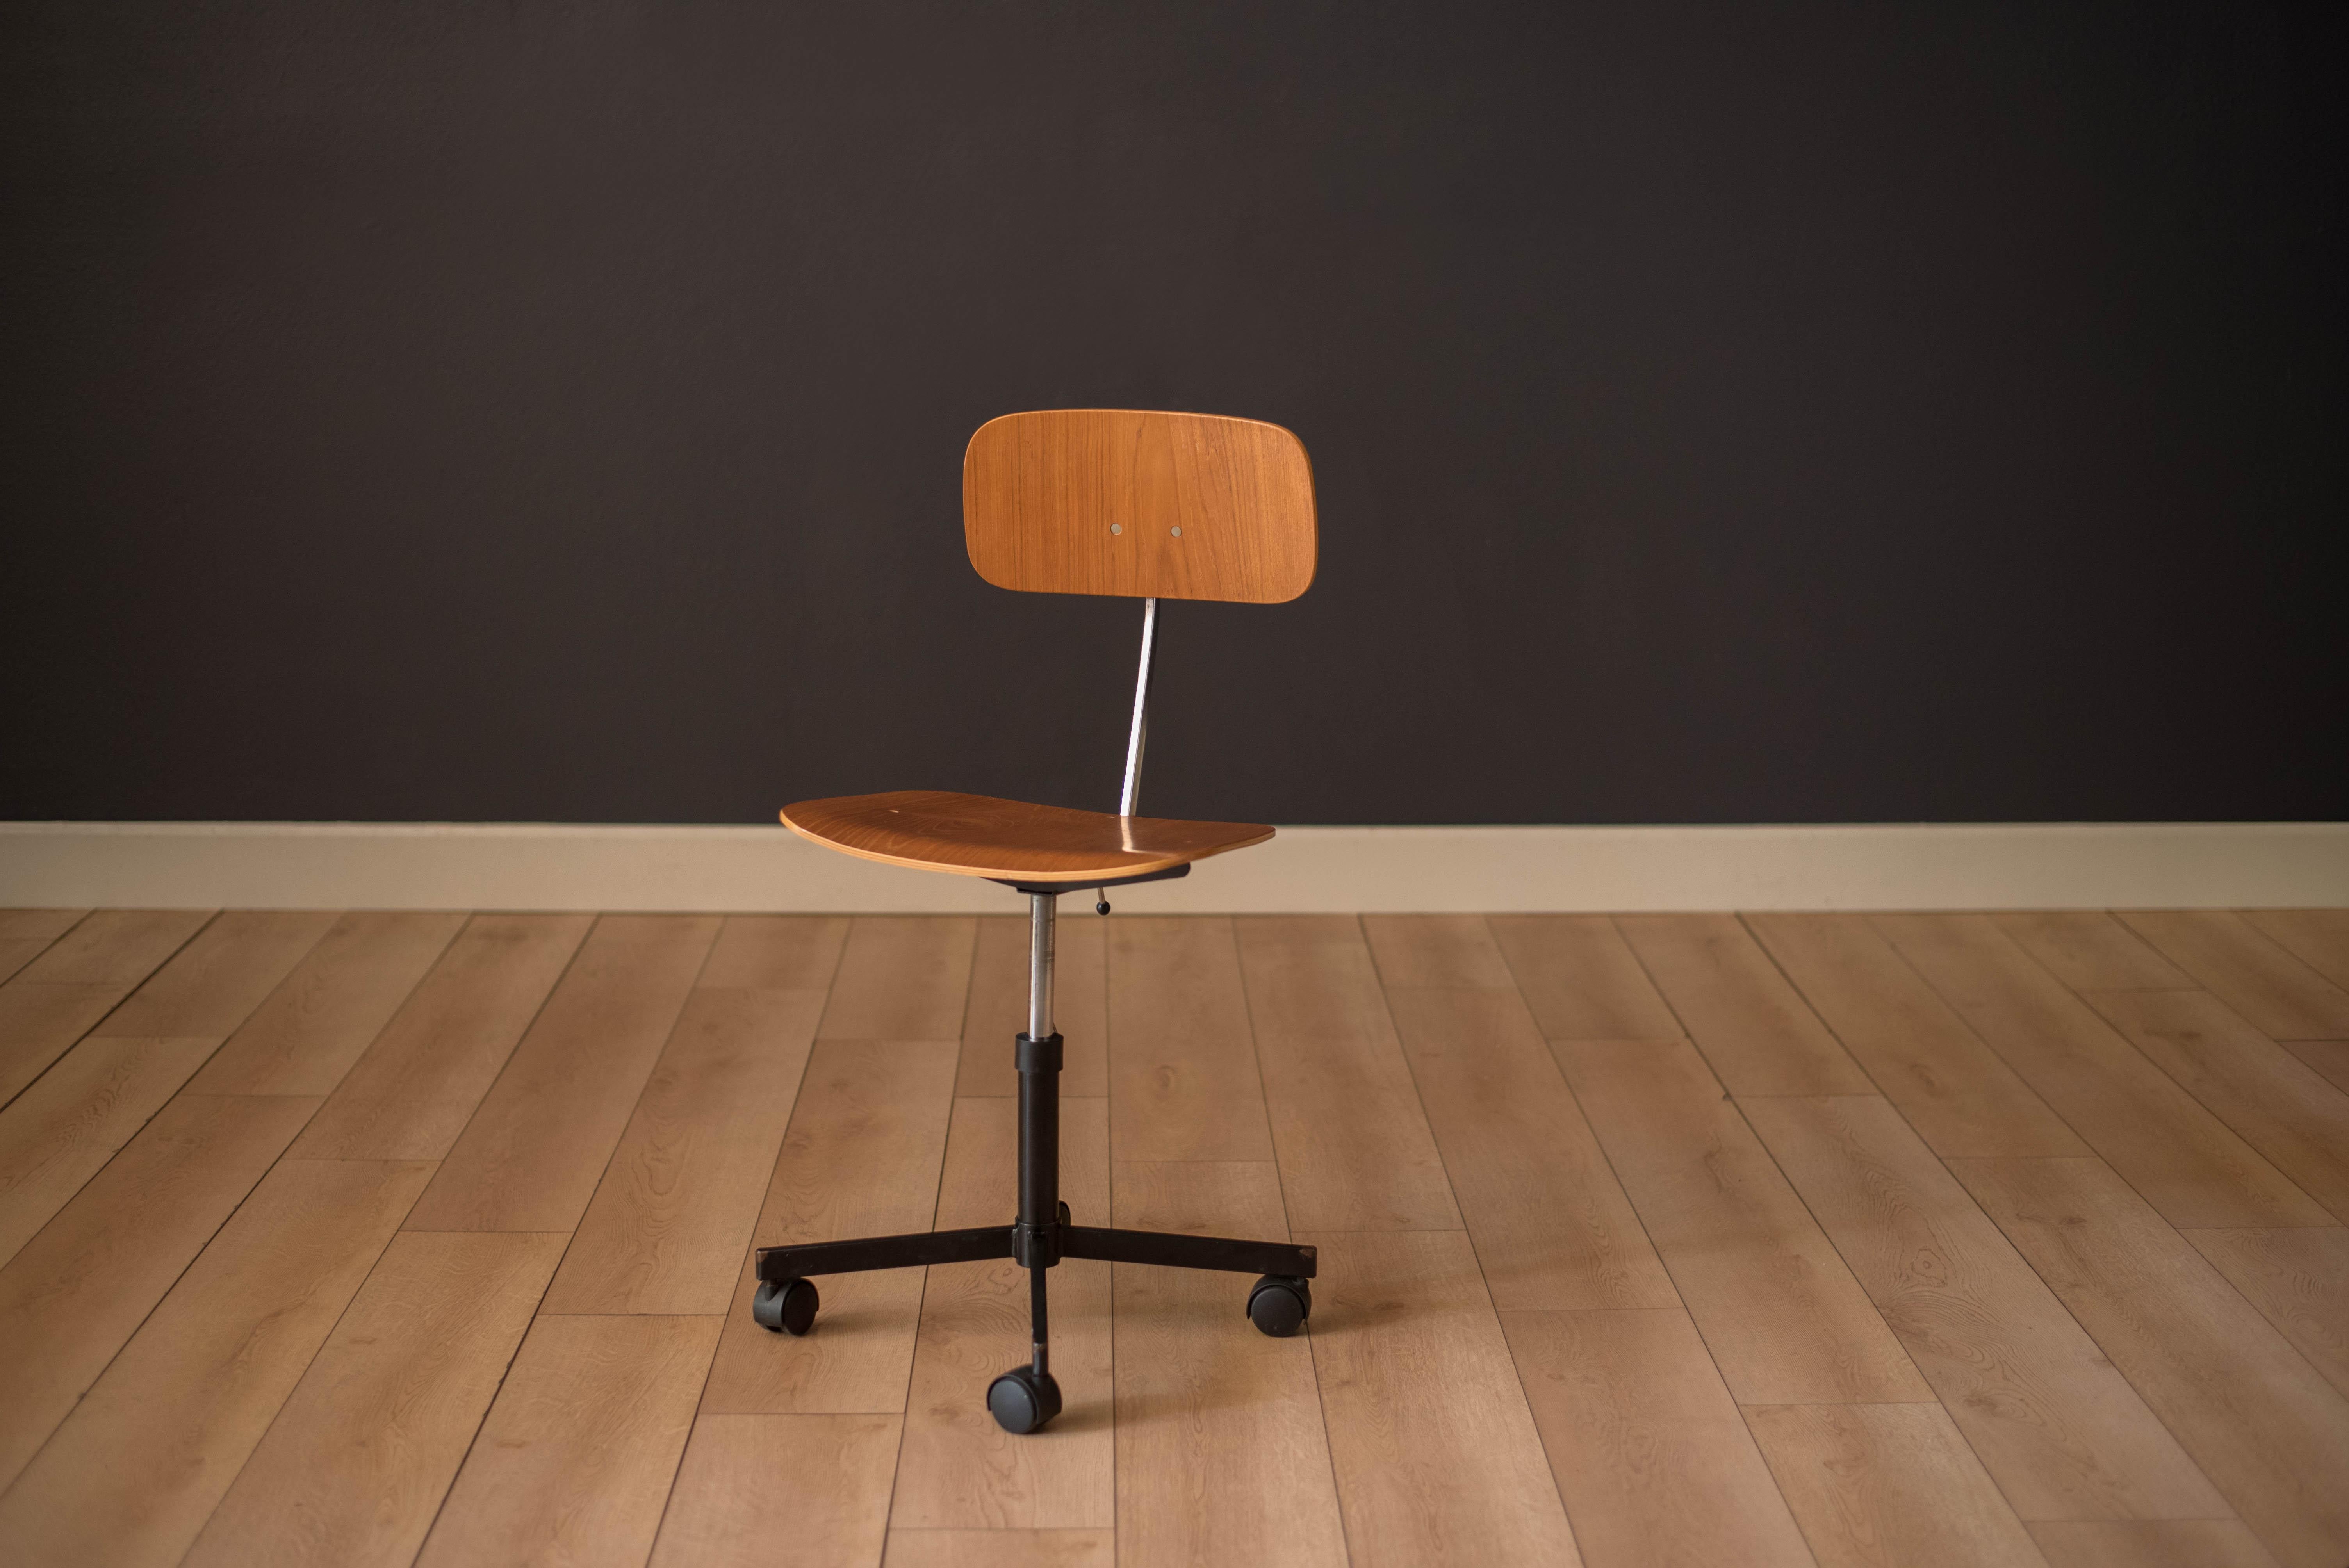 Danish teak desk chair designed by Jorgen Rasmussen for Kevi A/S. This piece includes an adjustable seat and backrest with a black swivel base. 

Seat height: 17.5 - 20.75